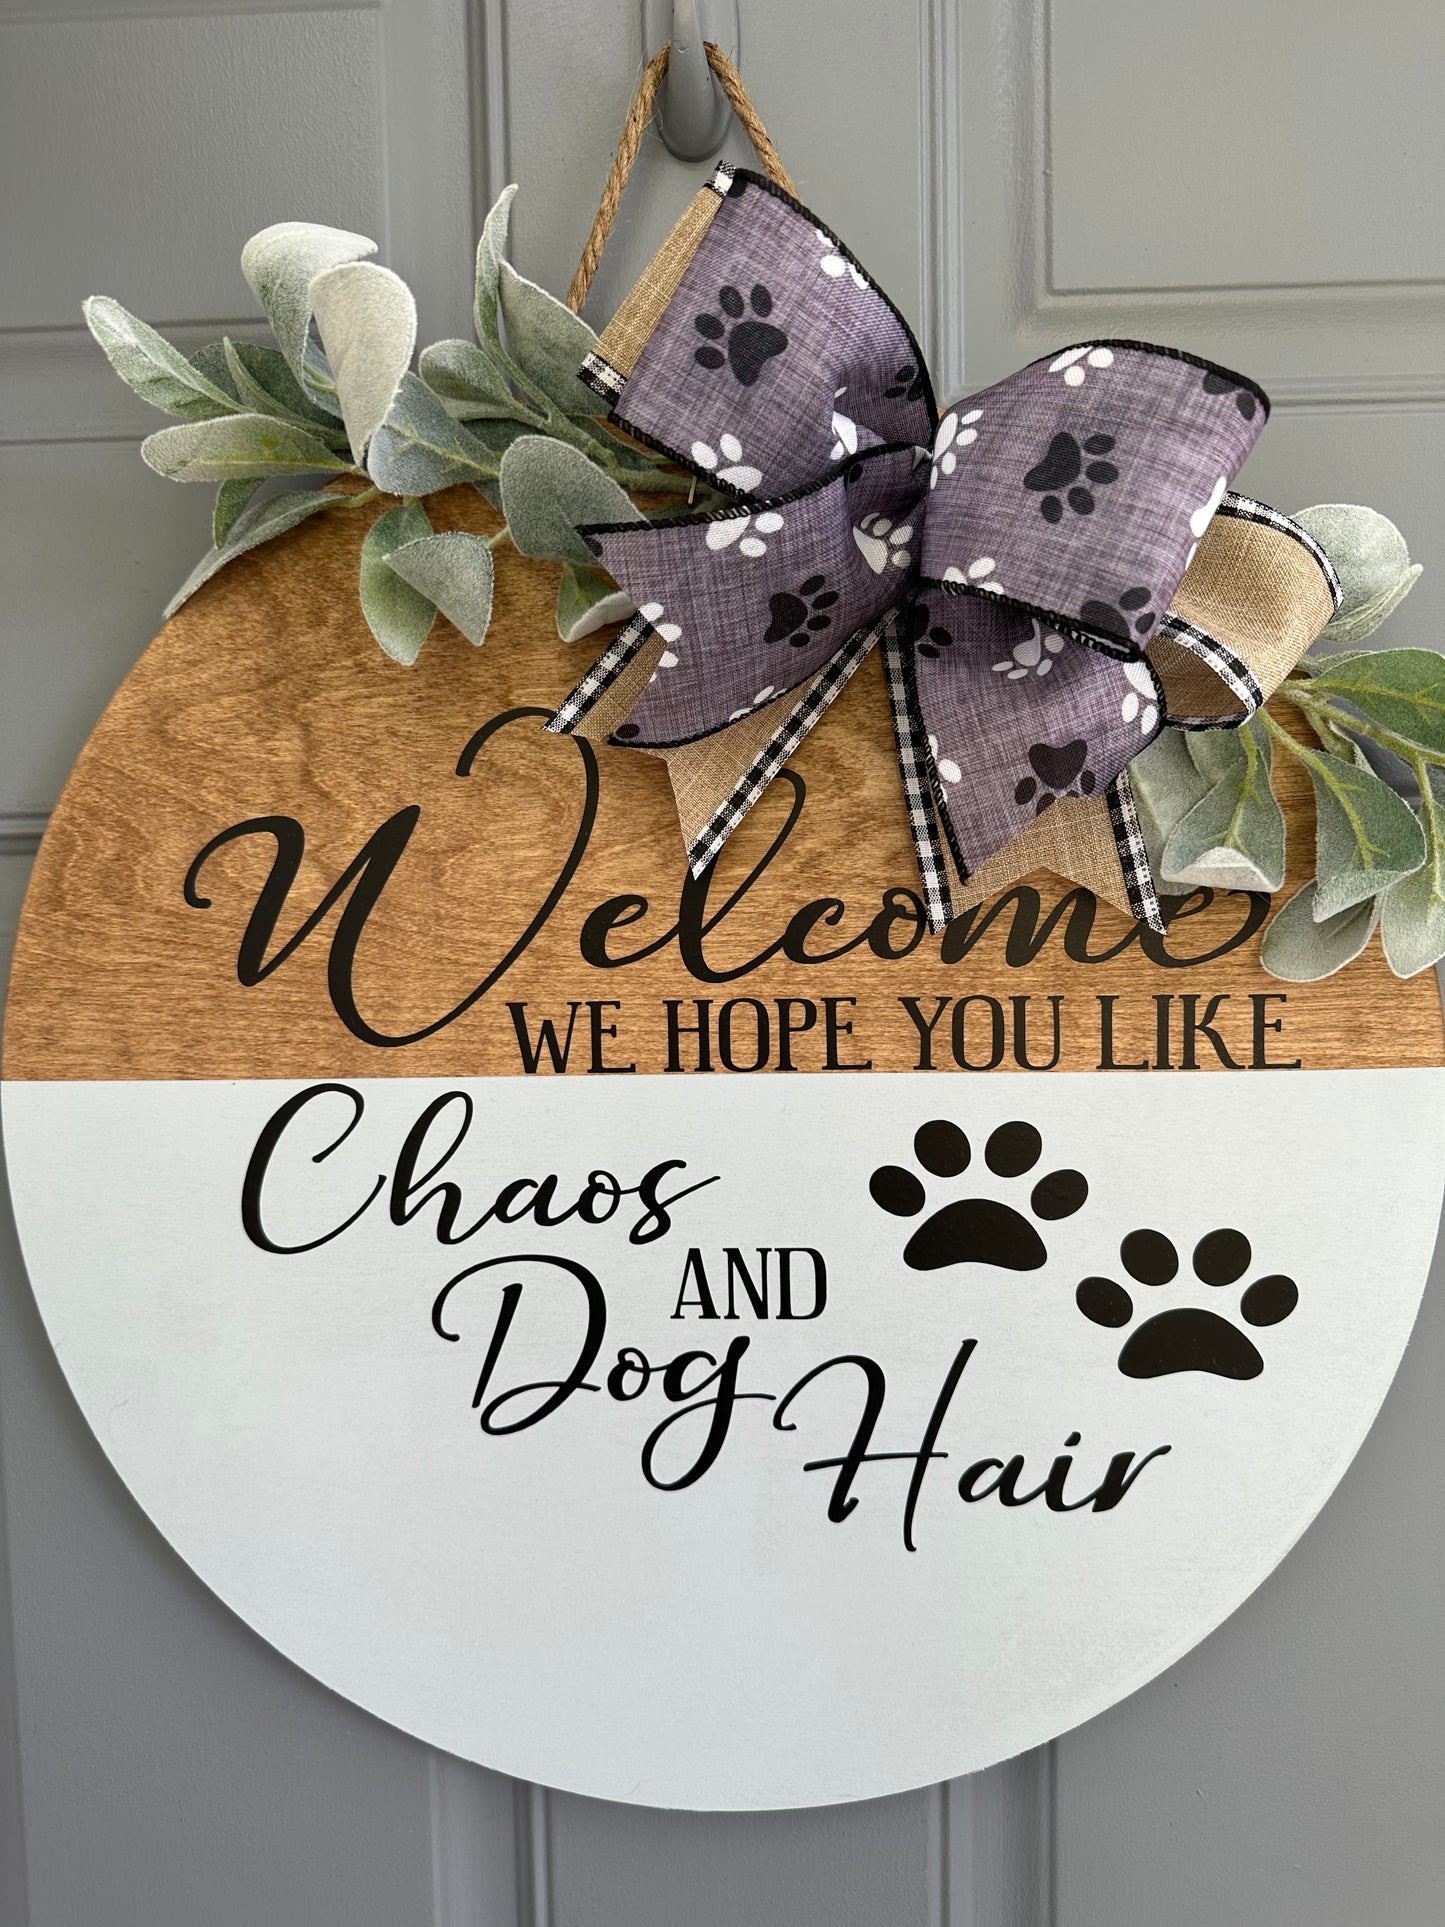 Welcome Hope You Like Chaos & Dog Hair Door Hanger - Willow Love Bug Designs 